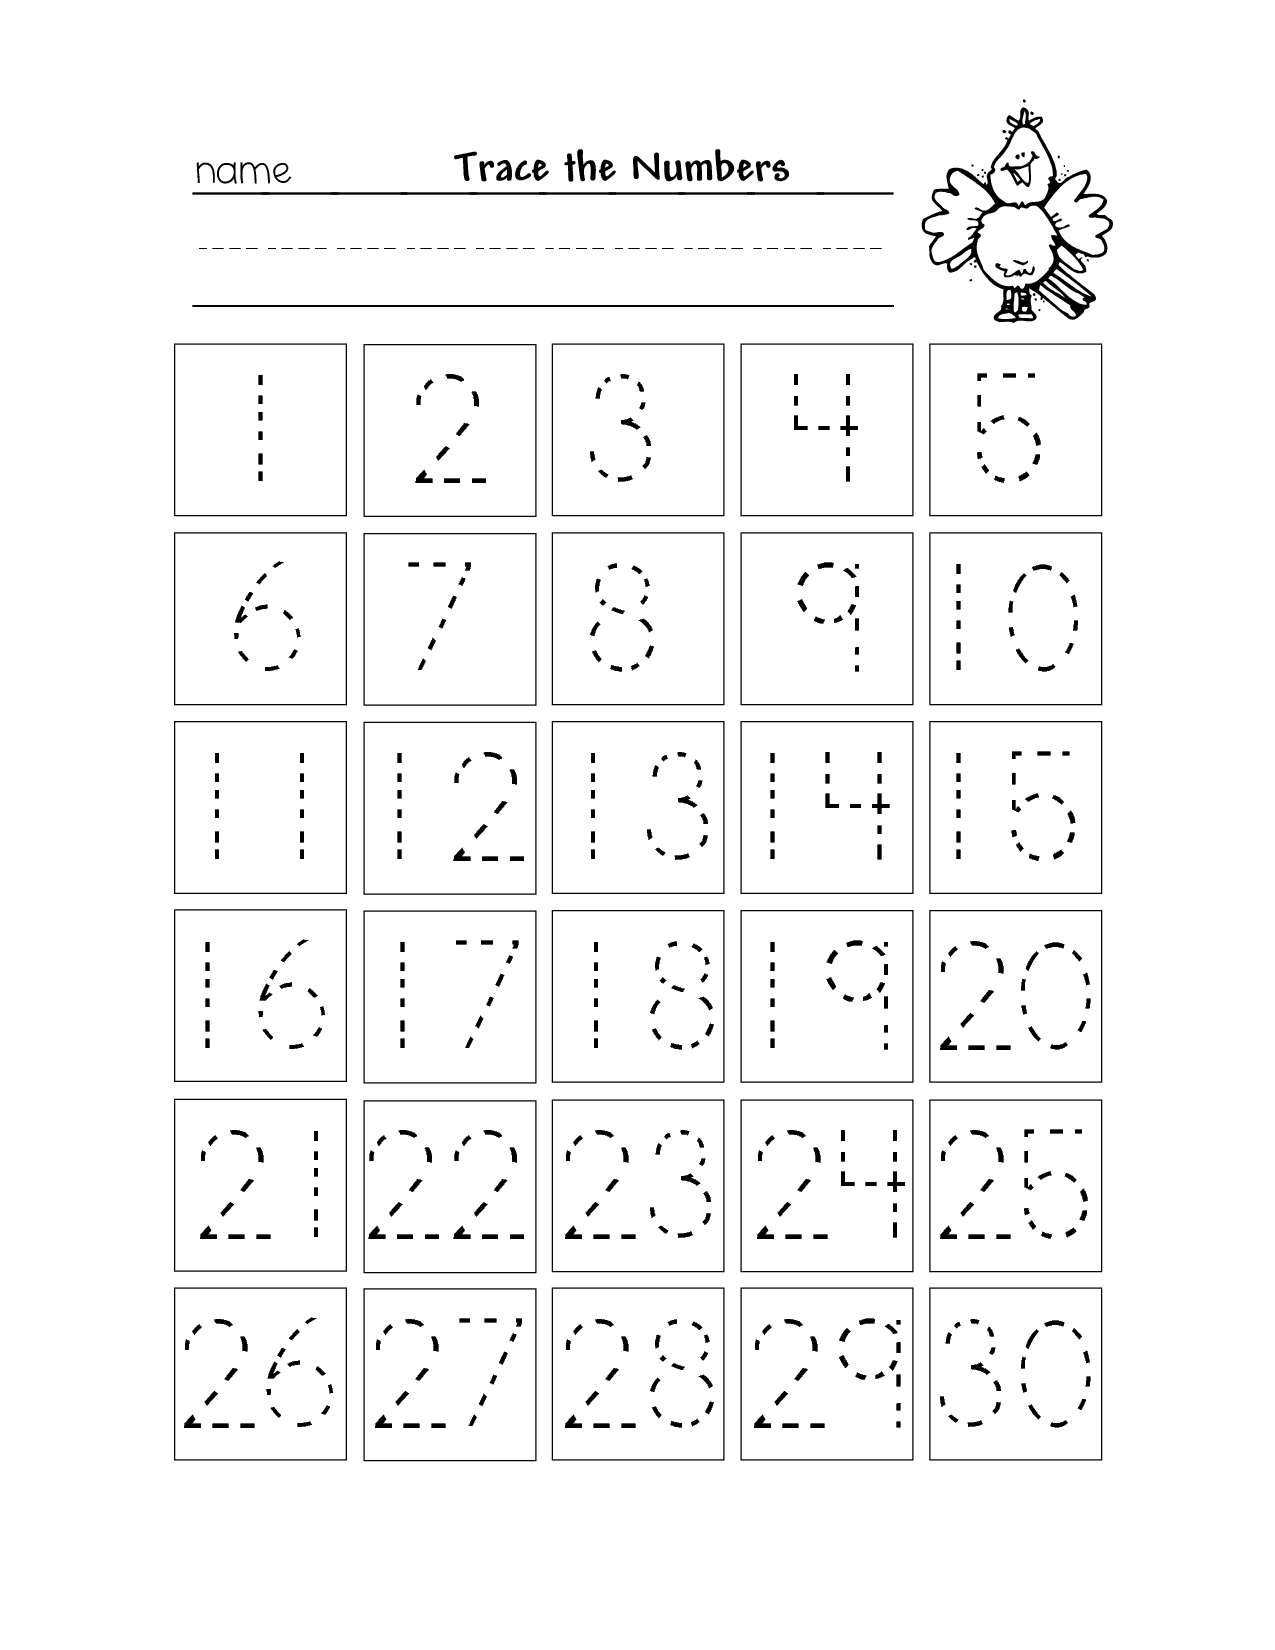 13-best-images-of-numbers-1-25-worksheets-tracing-numbers-1-30